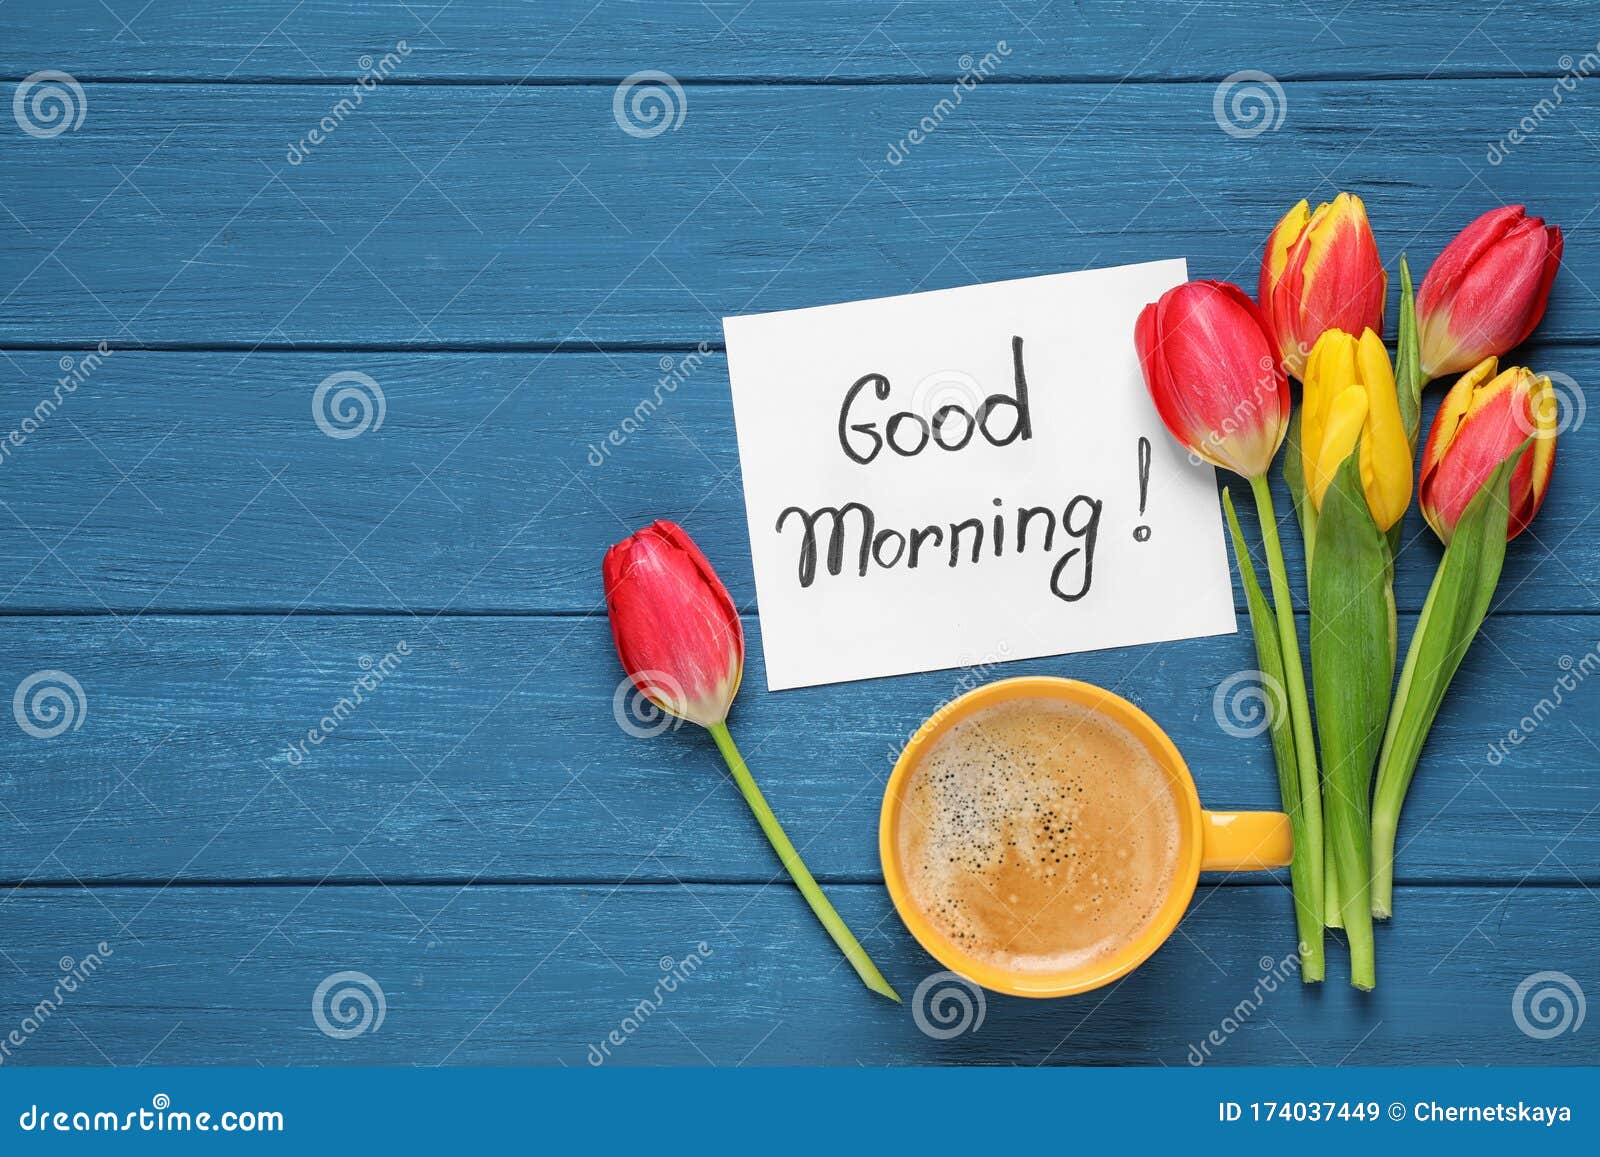 Message GOOD MORNING, Tulips and Coffee on Blue Wooden Table, Flat ...